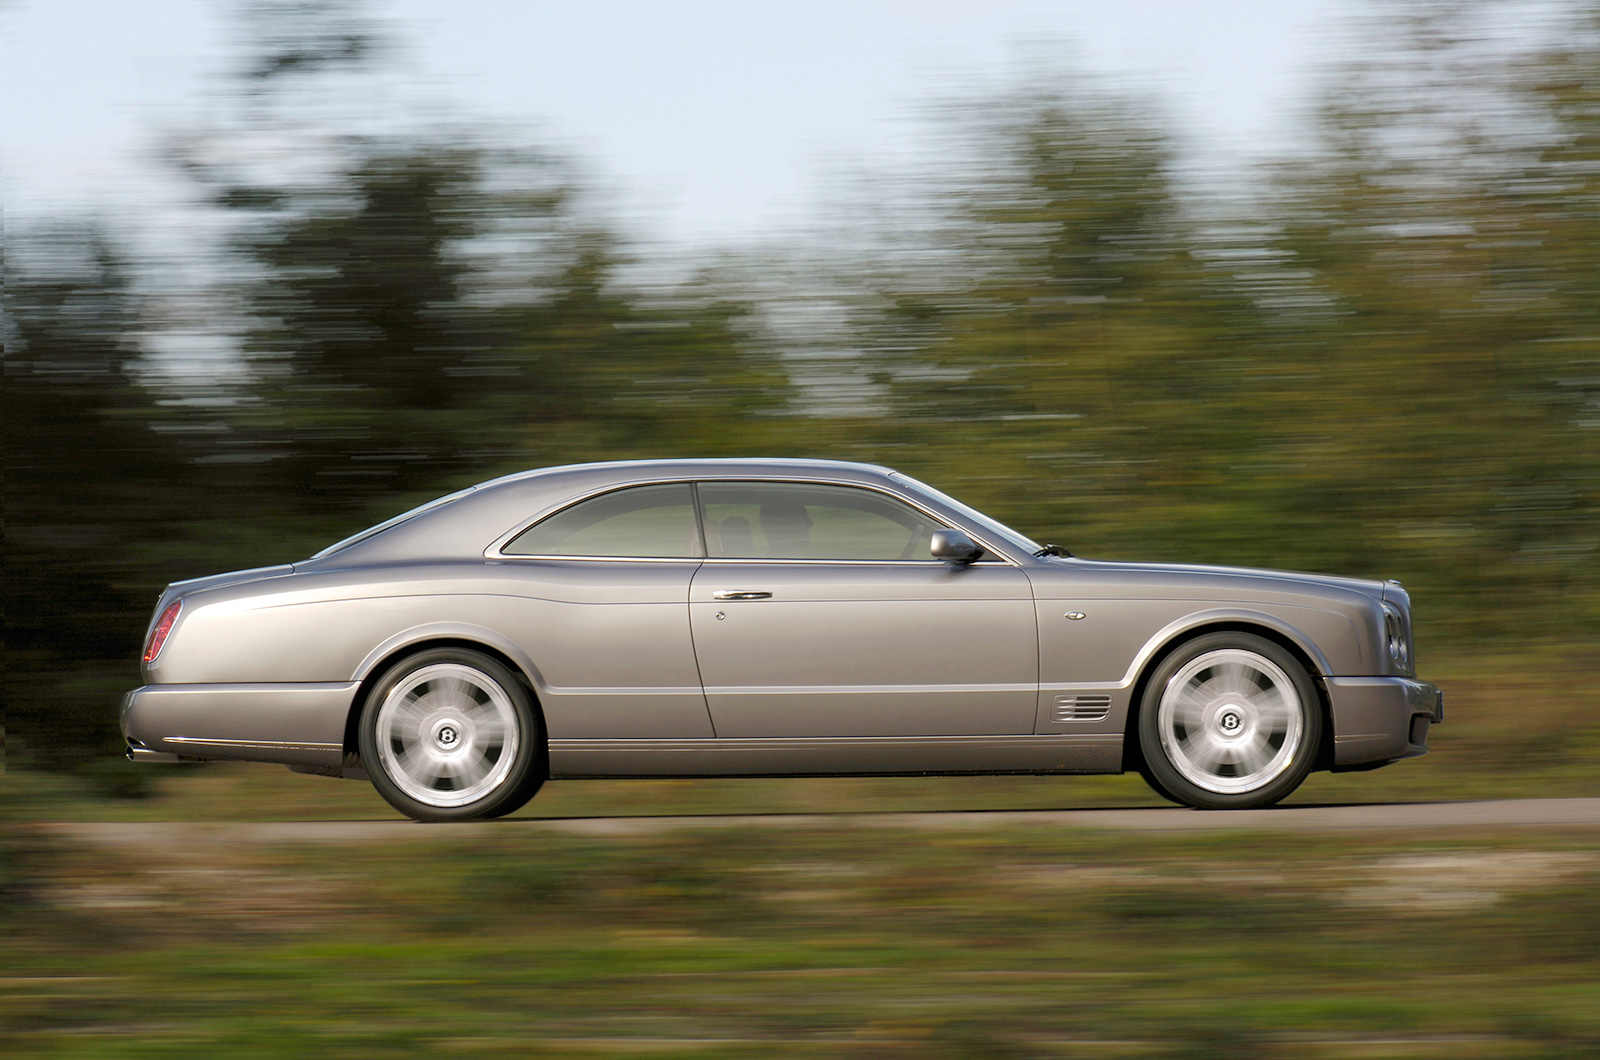 <p>Bentley revisited the Brooklands in 2008, when it launched a limited-run fixed-head Azure. Limited to <strong>550 </strong>examples at a cool £230k (<strong>US$335,350 </strong>at the time) apiece, each car featured a twin-turbo 6.75-liter V8 that put out a thundering <strong>537 HP </strong>and 774-lb ft of torque. The production run lasted for three years, with <strong>500 </strong>examples sold before production even began.</p>